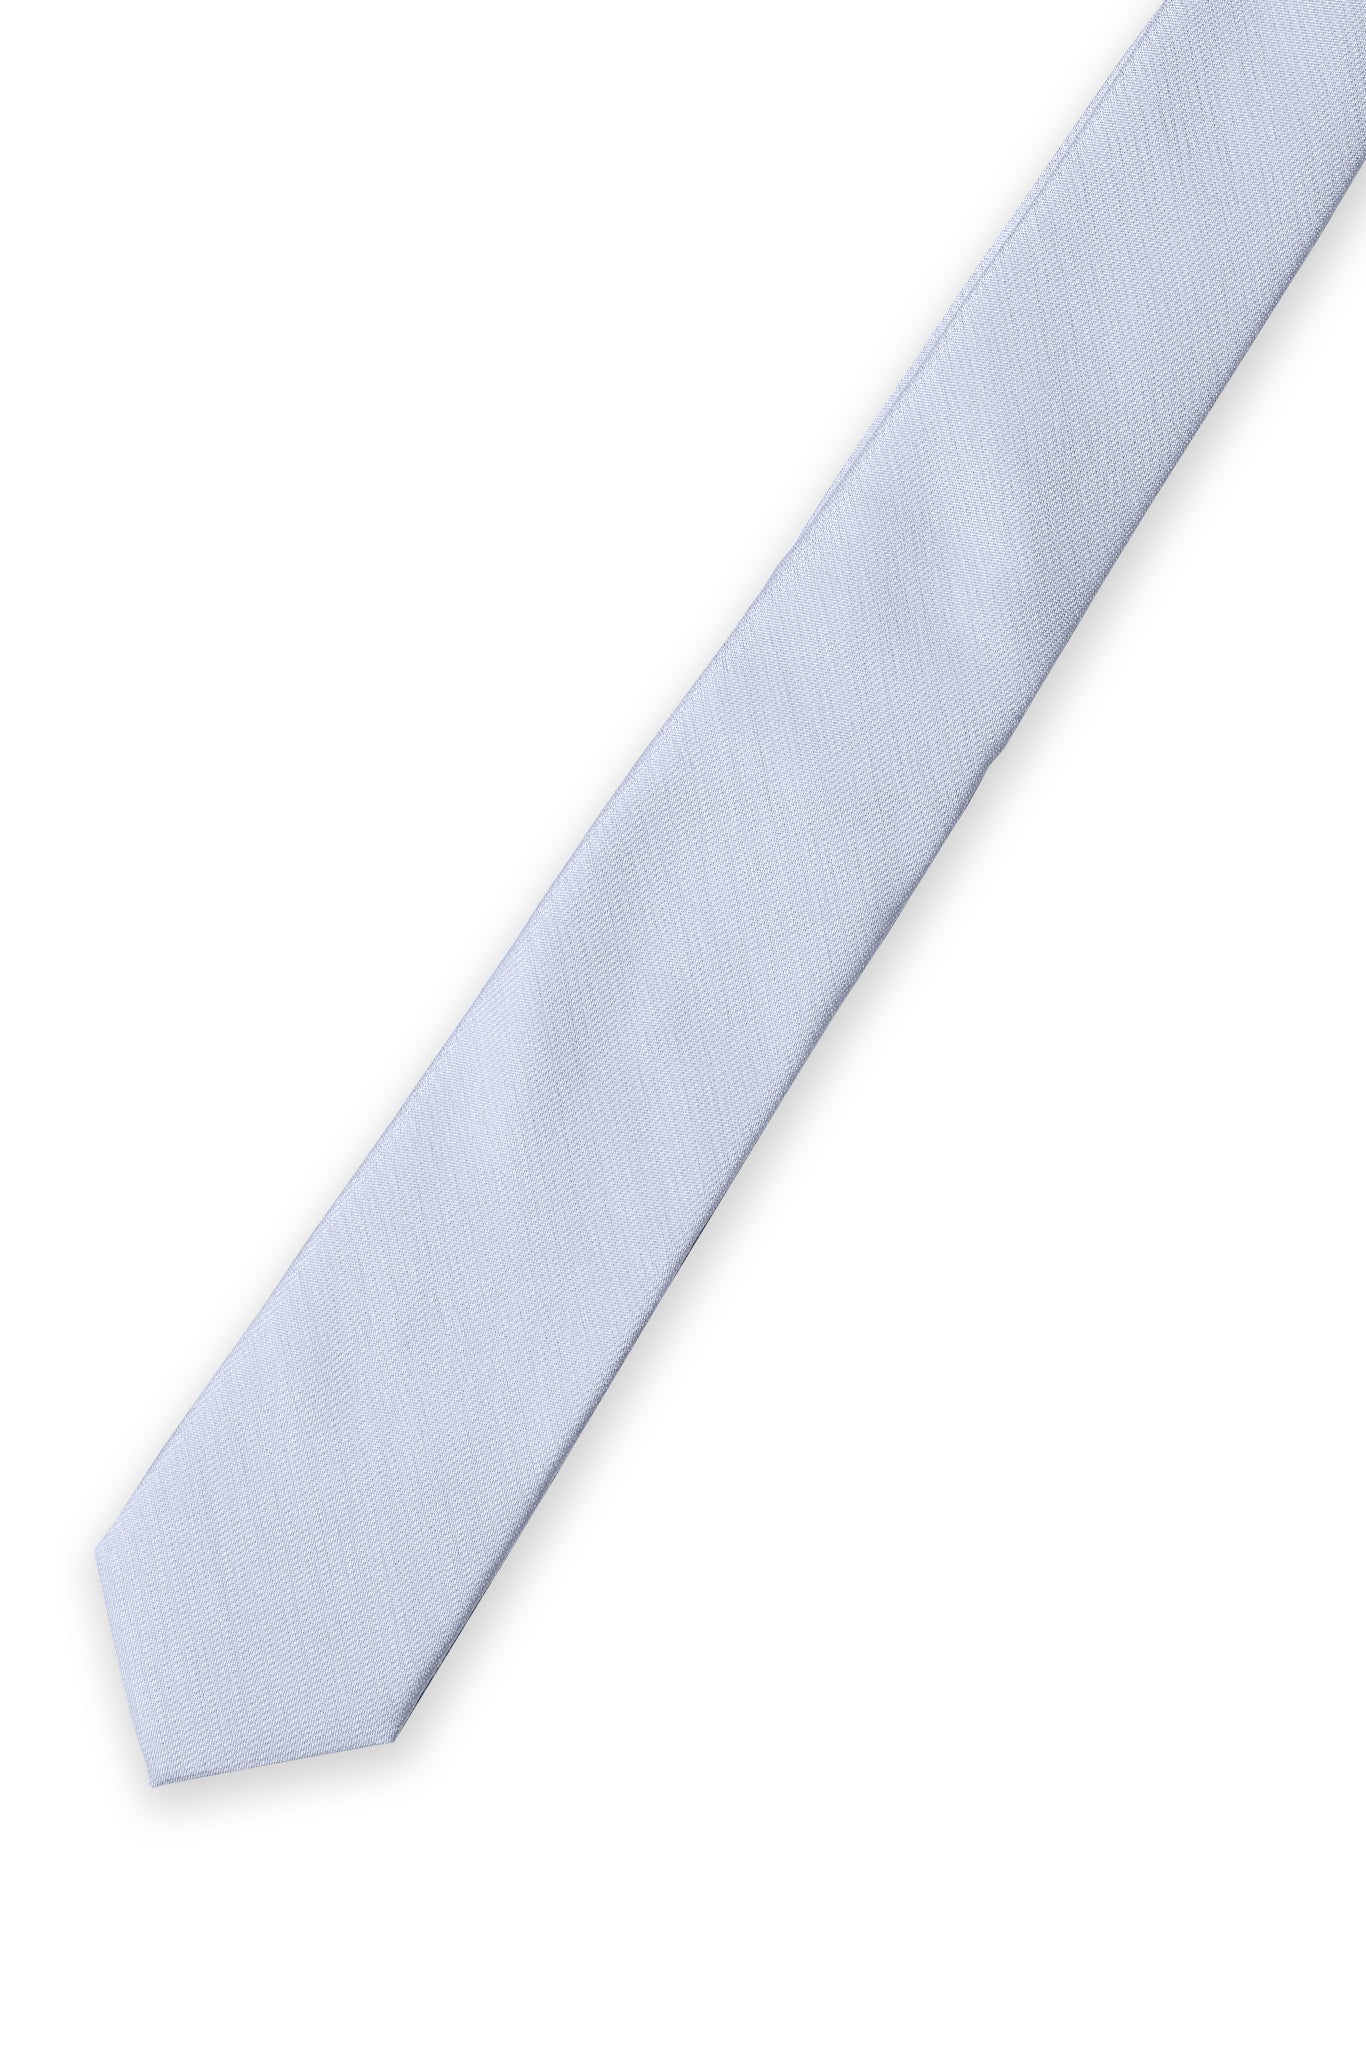 Simon Necktie in Ice Blue by Birdy Grey, front view